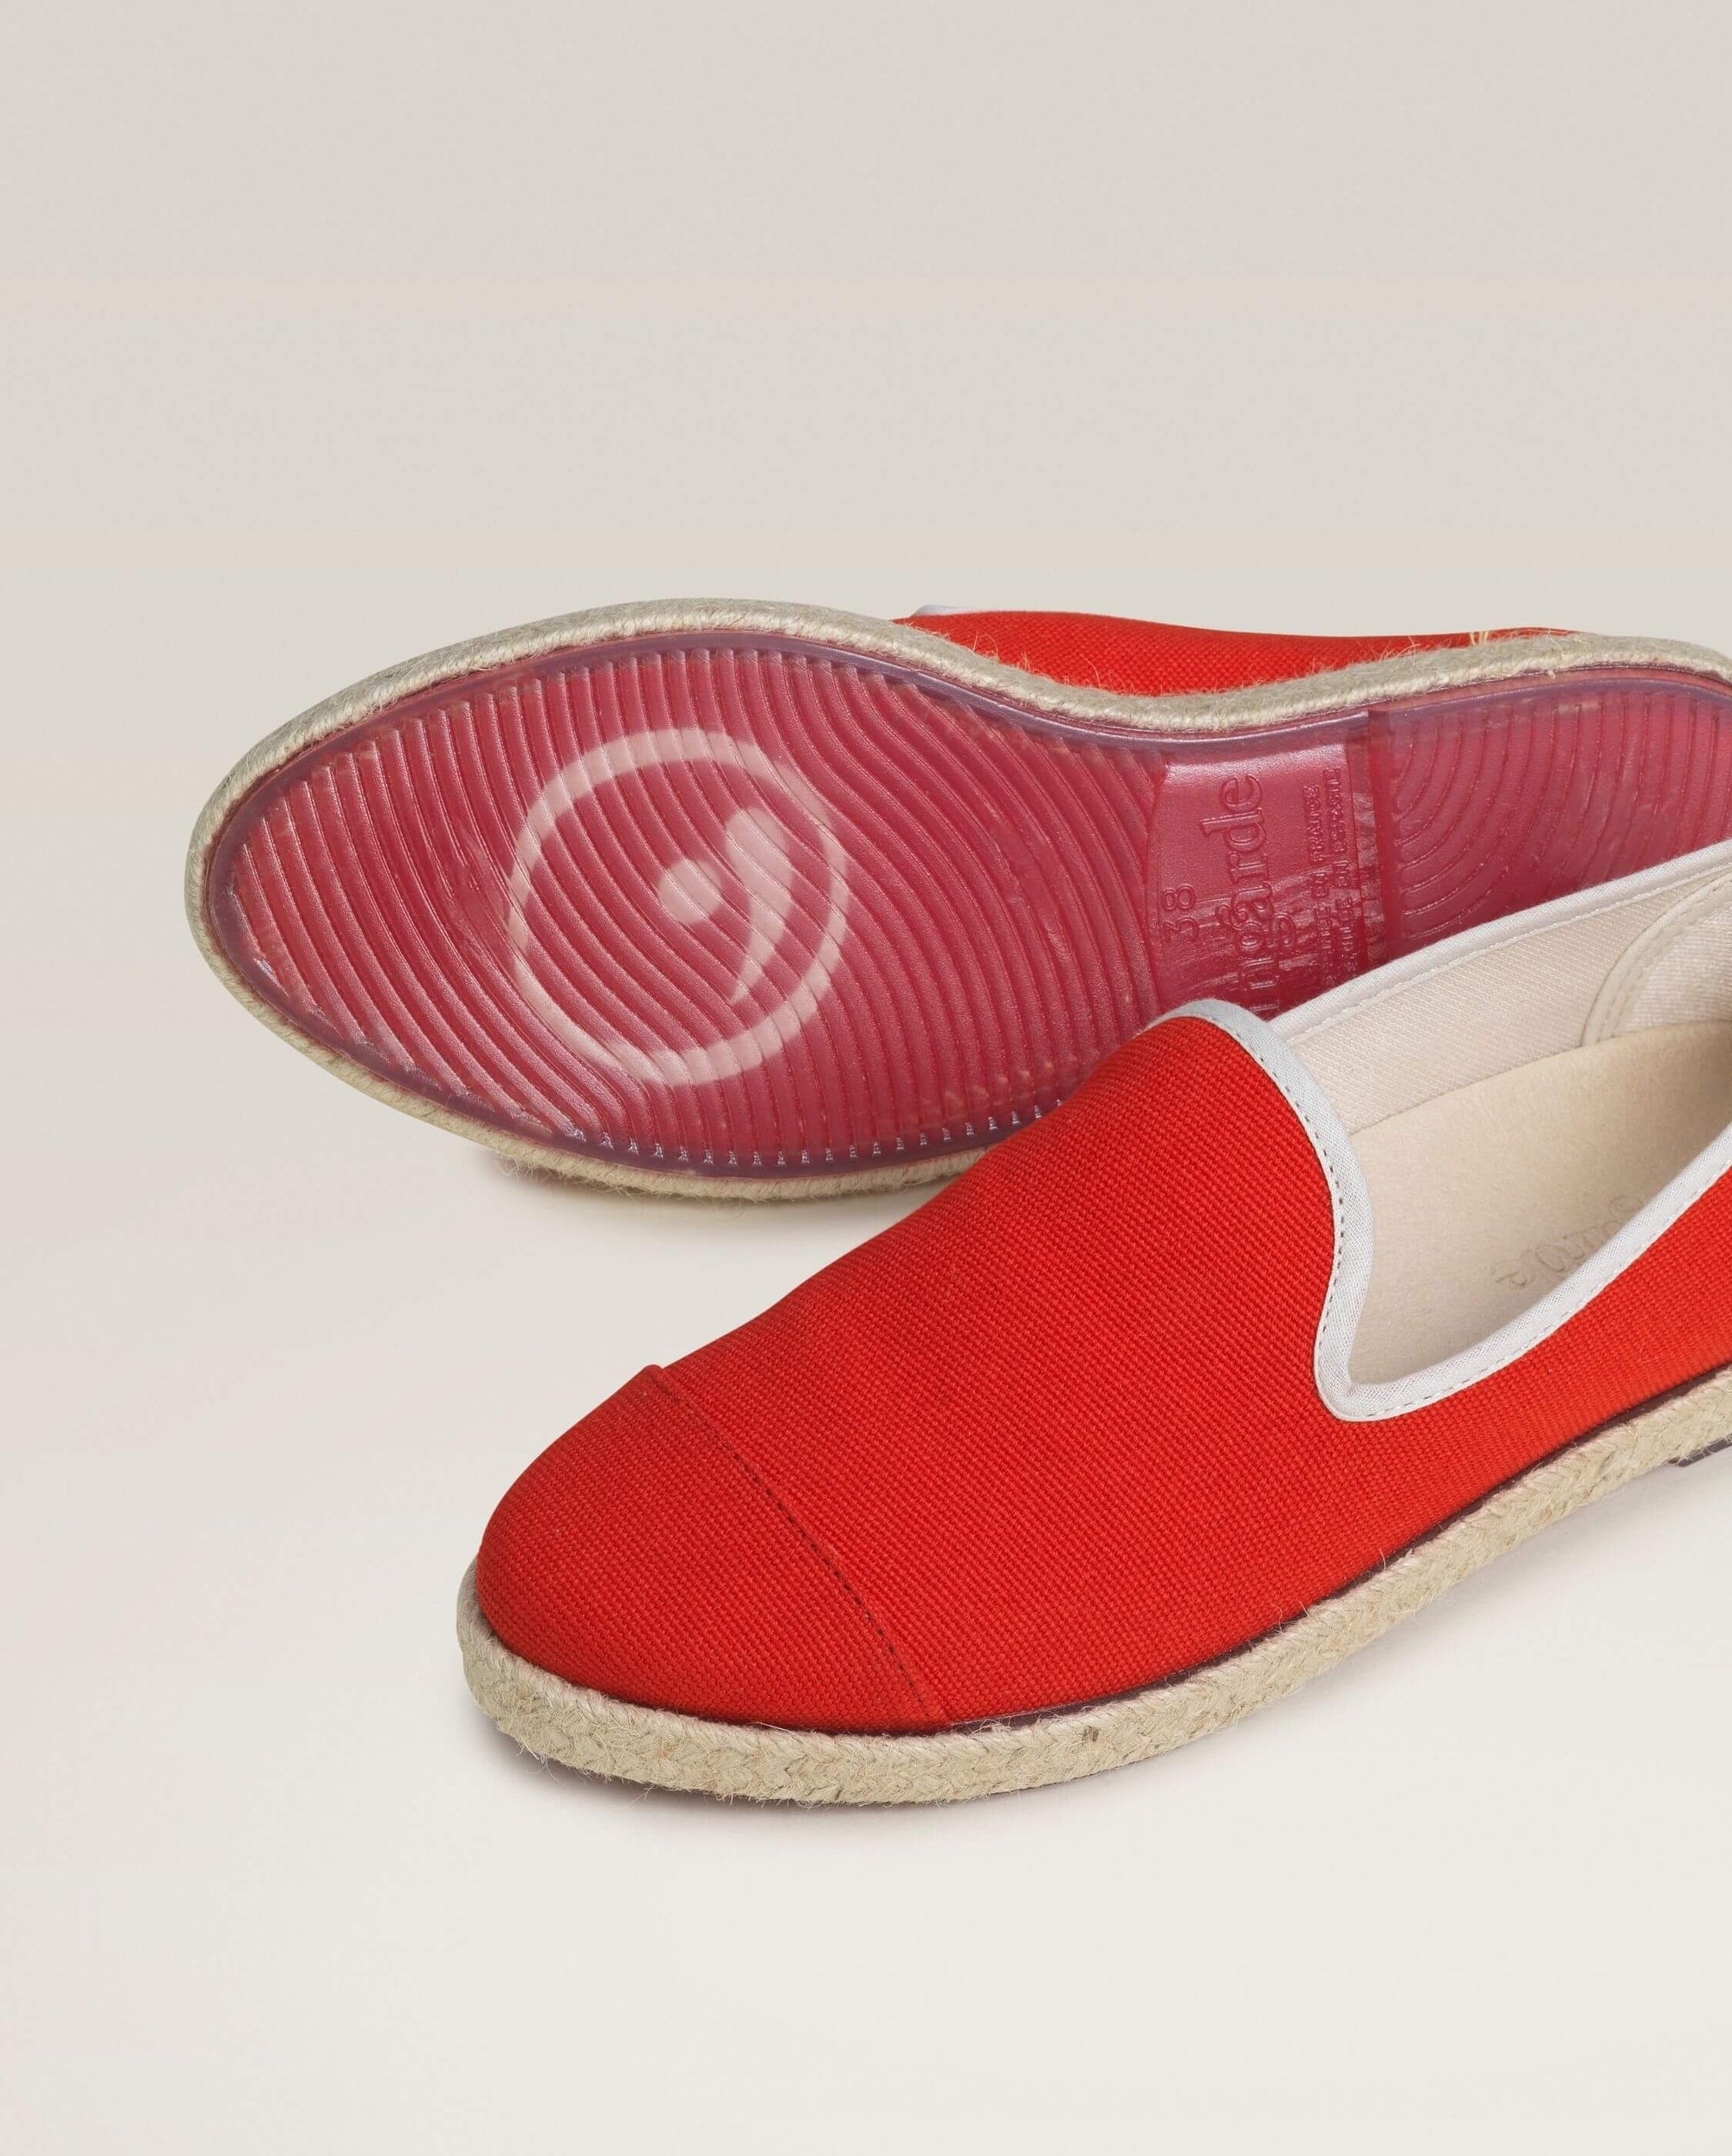 Men's espadrille, recycled cotton, red